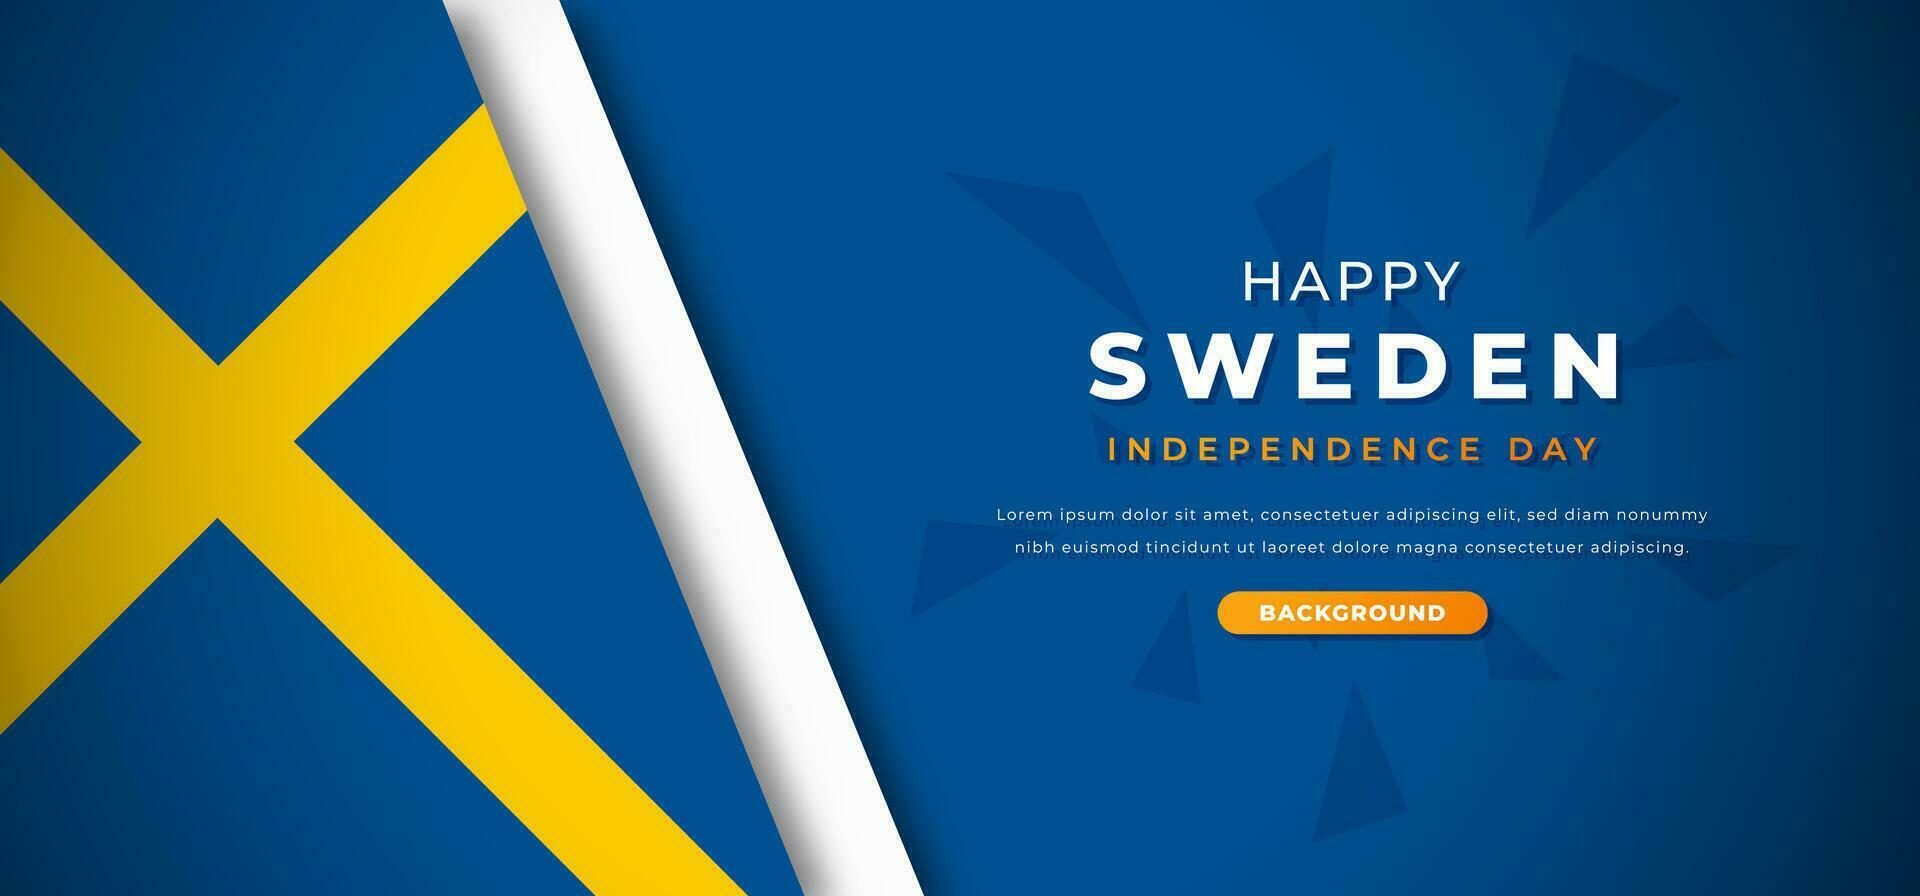 Happy Sweden Independence Day Design Paper Cut Shapes Background Illustration for Poster, Banner, Advertising, Greeting Card vector